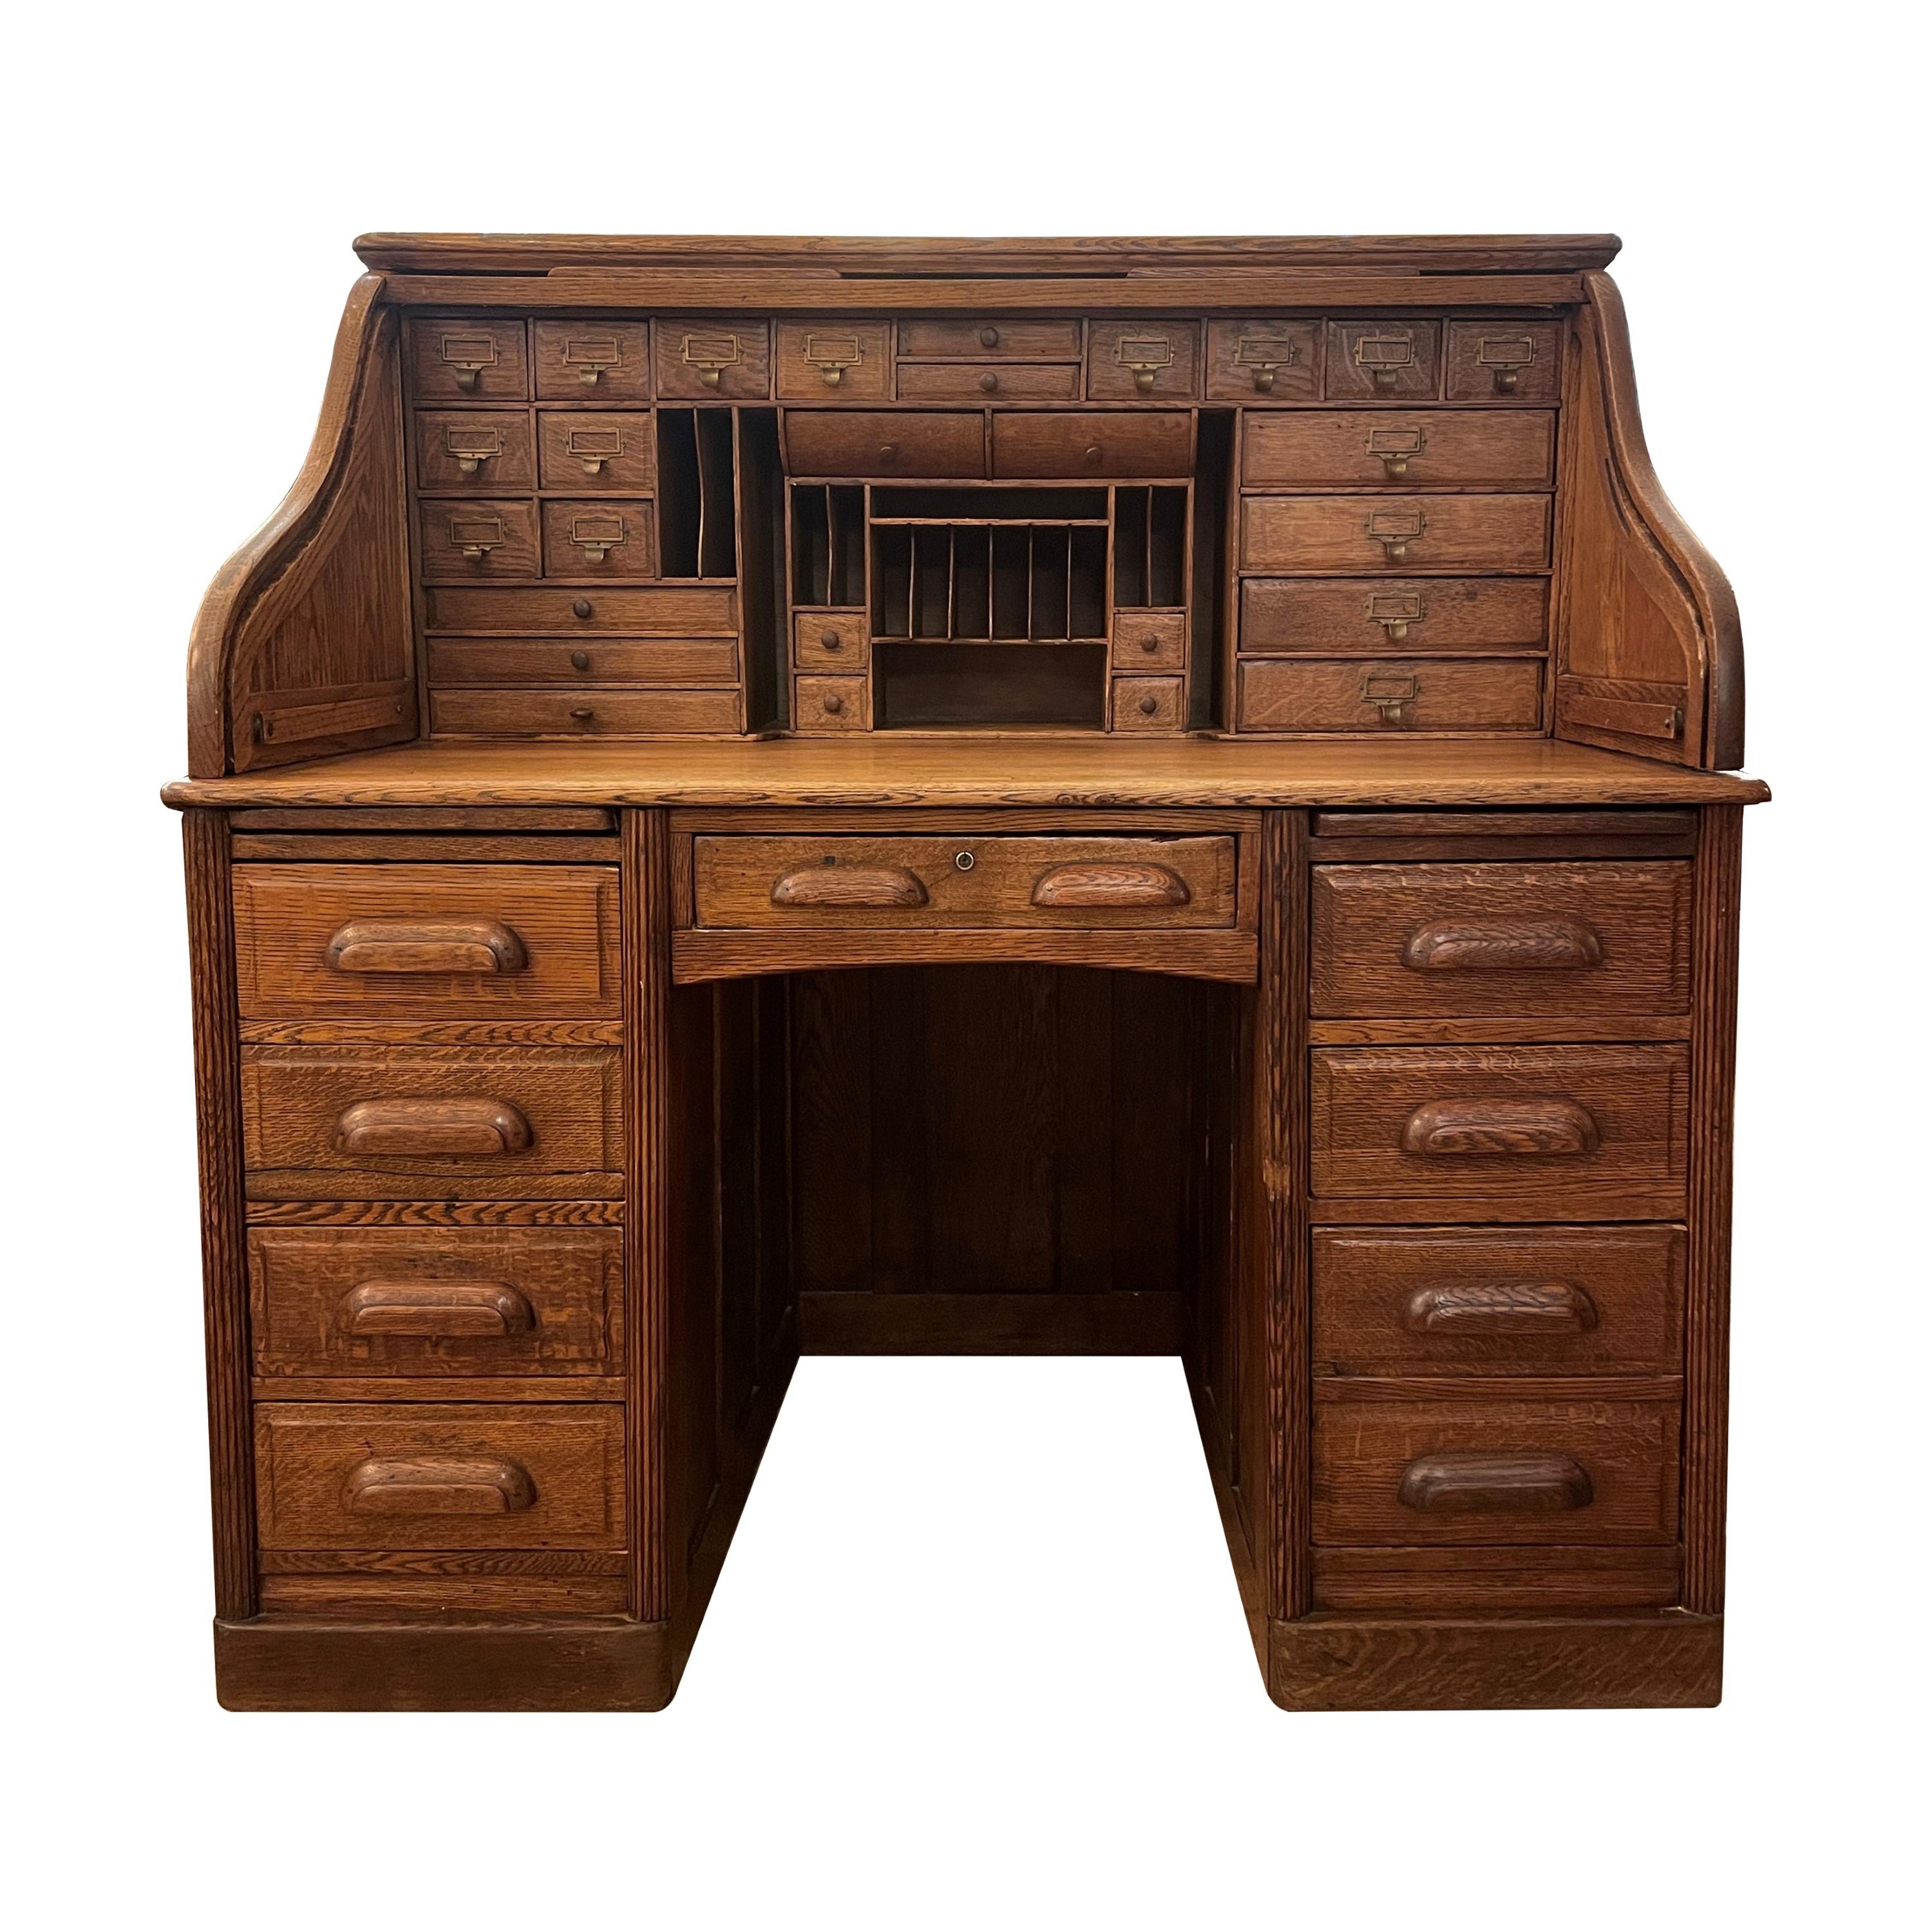 Antique oak roll top desks are exquisite treasures, showcasing intricate craftsmanship, sturdy construction, and a wealth of storage options with drawers and cubbies, perfect for organizing and displaying cherished items. This desk can be moved in